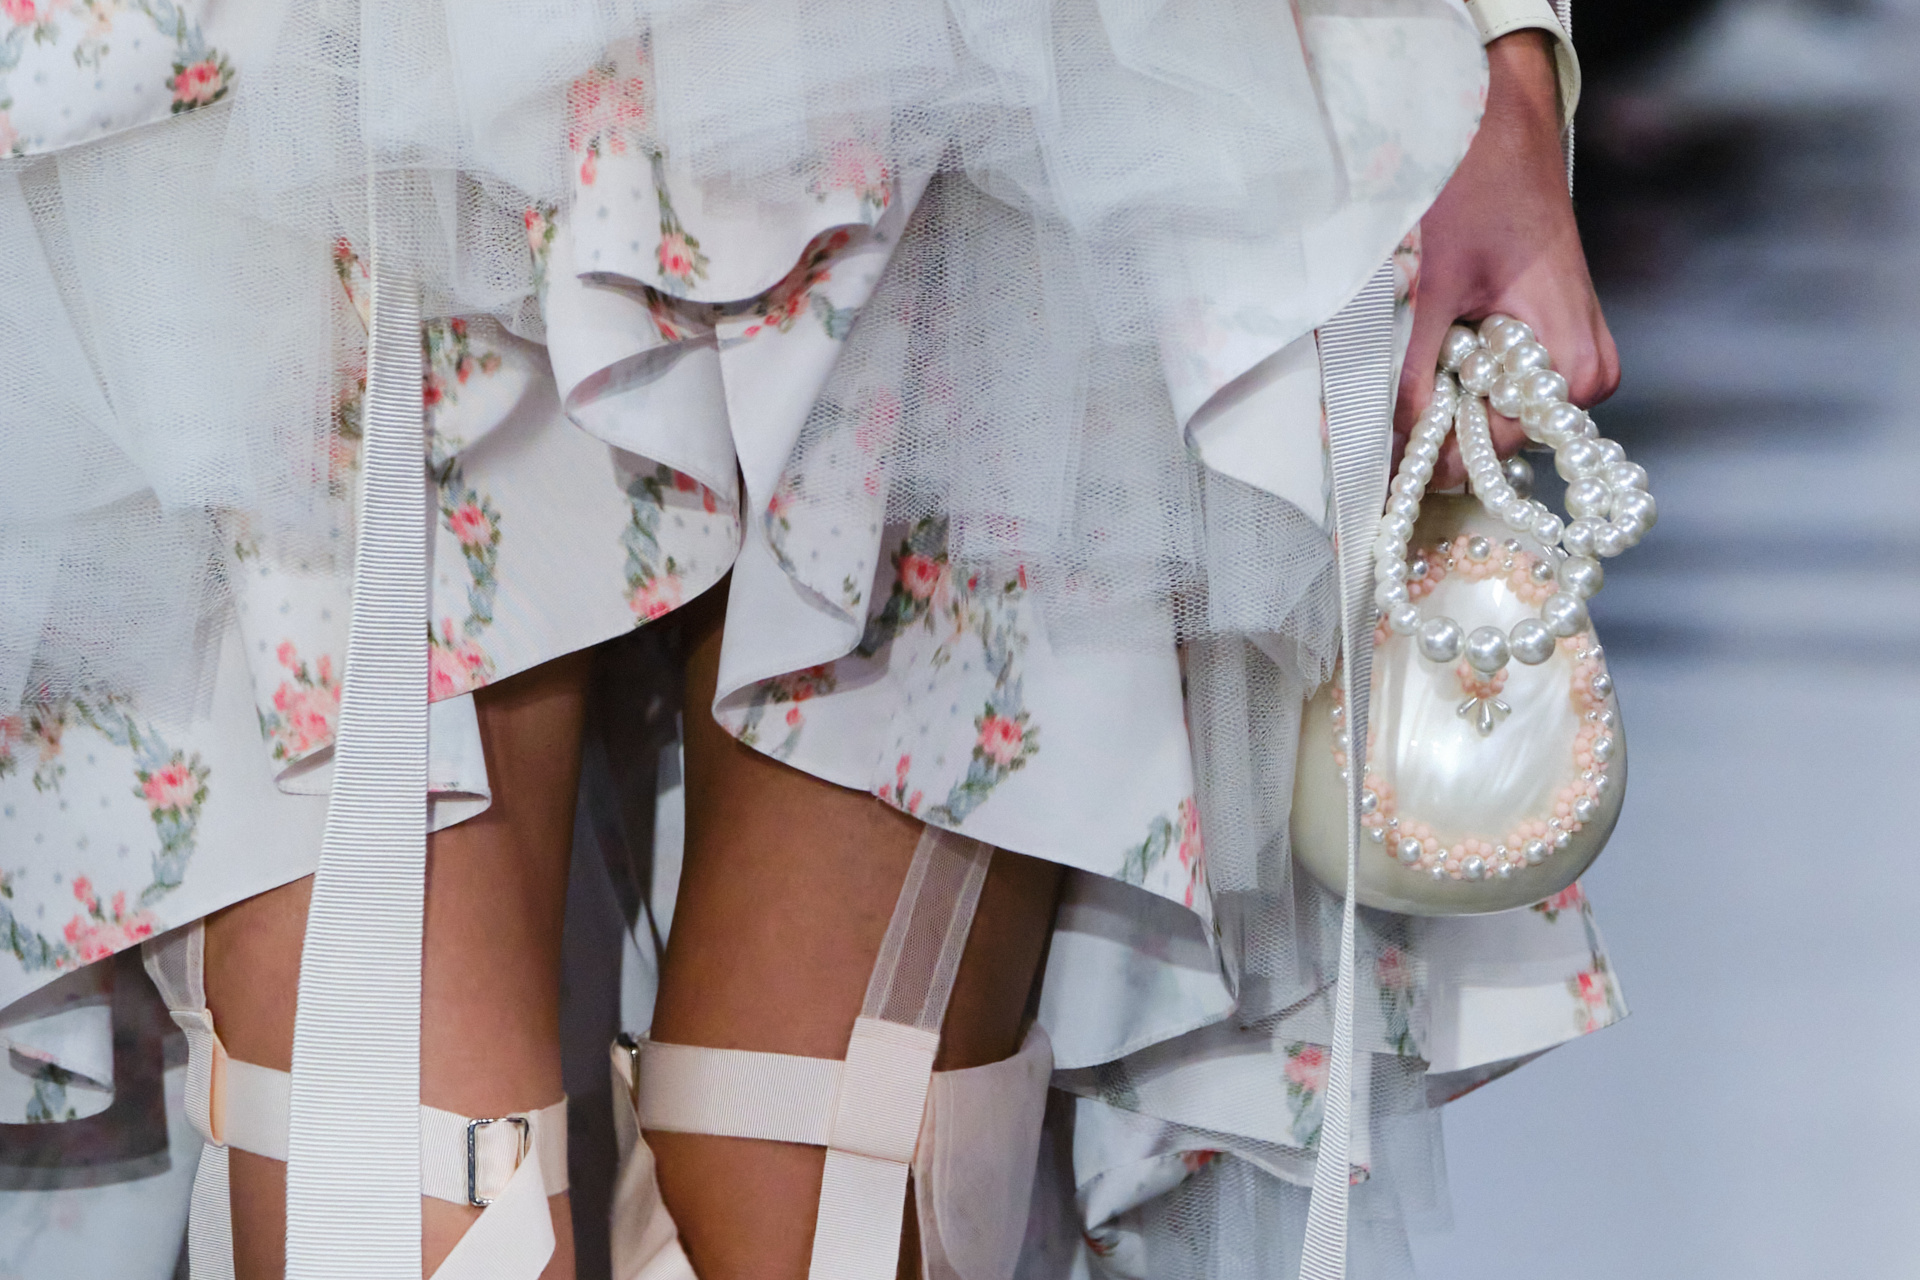 Close up of dress hemline and hand holding a pearl bag